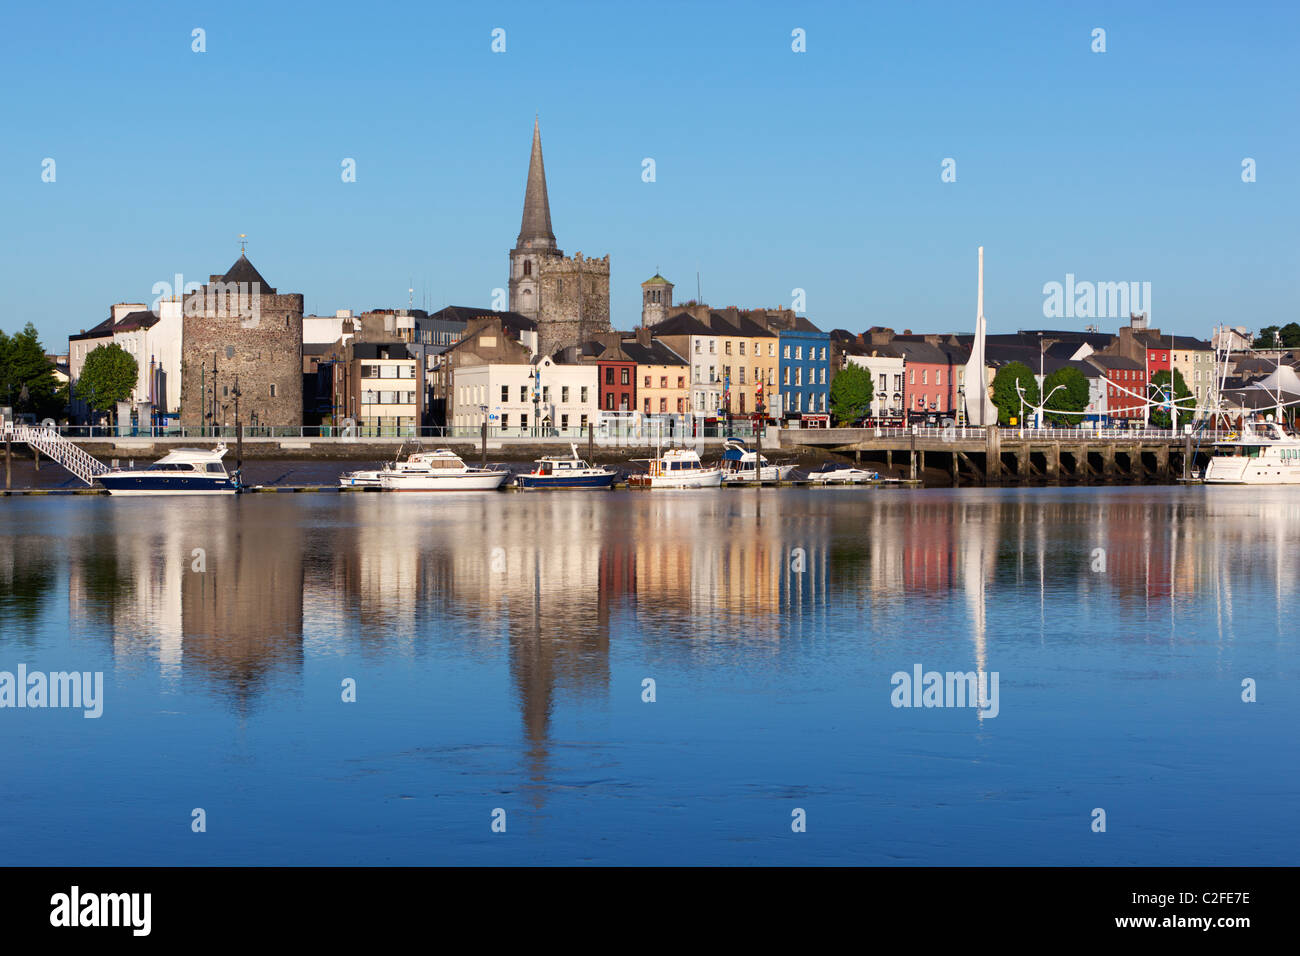 View over River Suir to Reginald's Tower, Holy Trinity and Christ Church Cathedrals Stock Photo